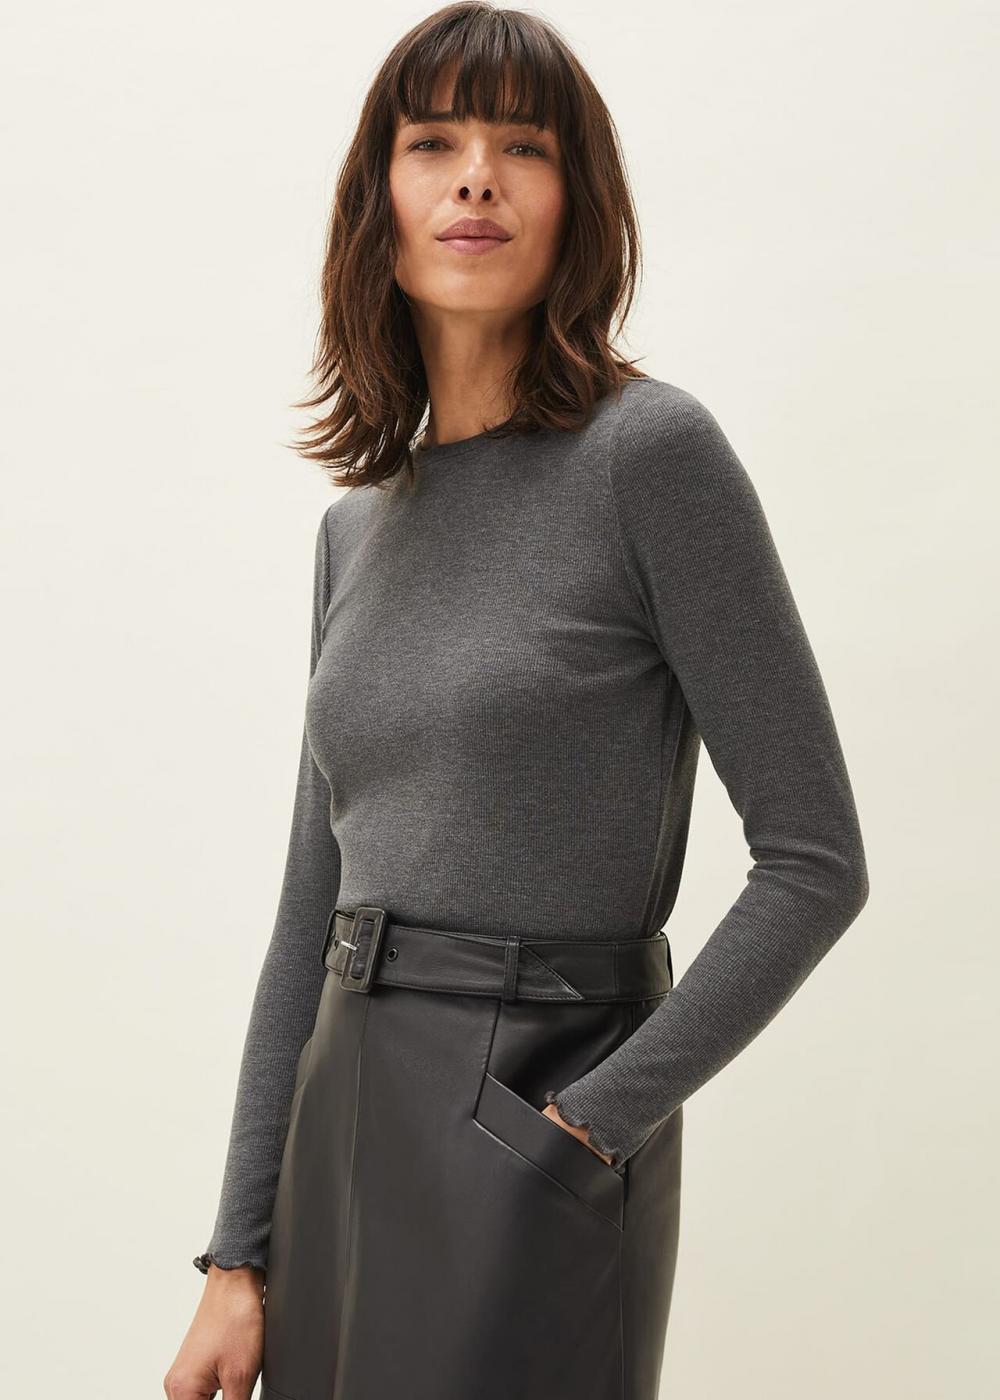 Cally Ribbed Jersey Top Charcoal | Phase Eight Womens Tops & T-Shirts